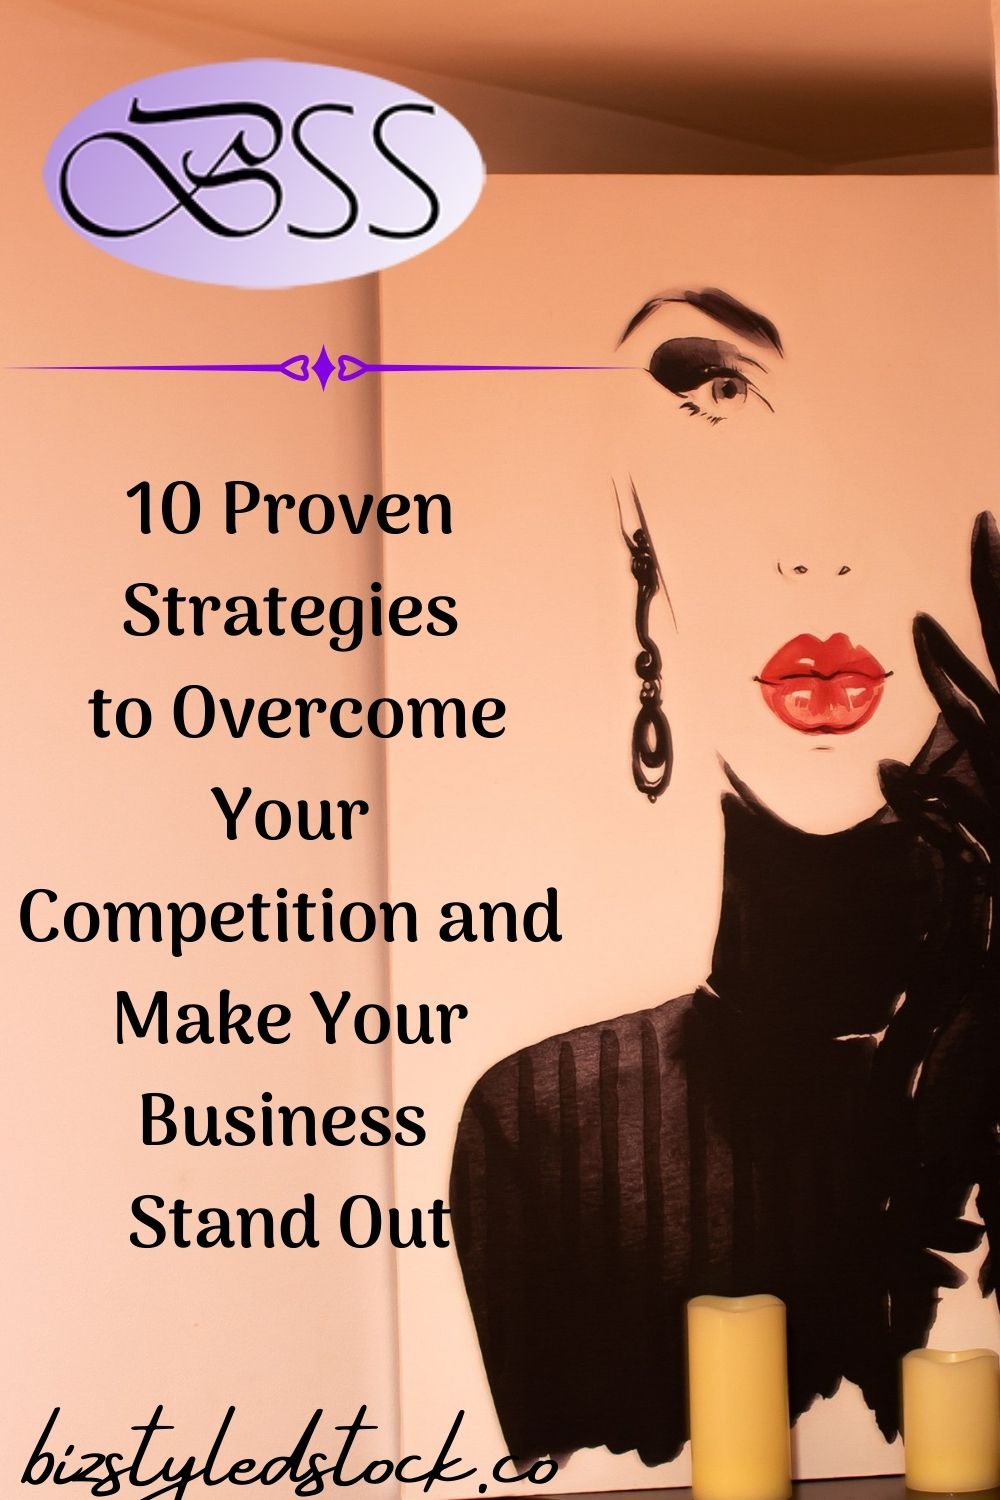 10 Proven Strategies to Overcome Your Competition and Make Your Business Stand Out #howtomakeabusinessstandout.